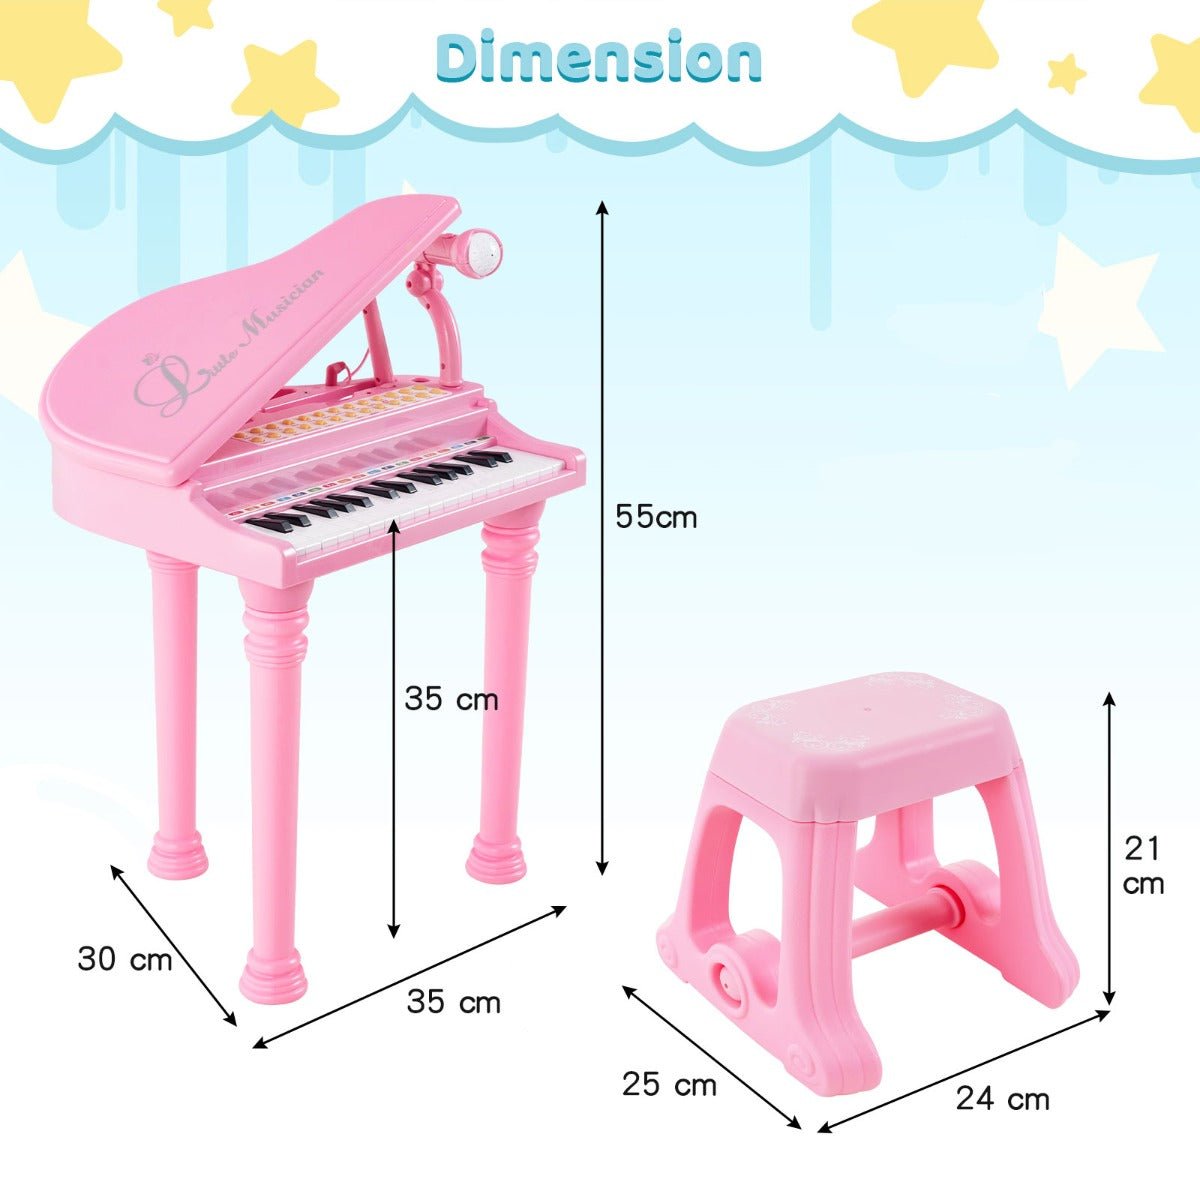 Get the Kids Pink Piano Keyboard with Microphone for Budding Musicians